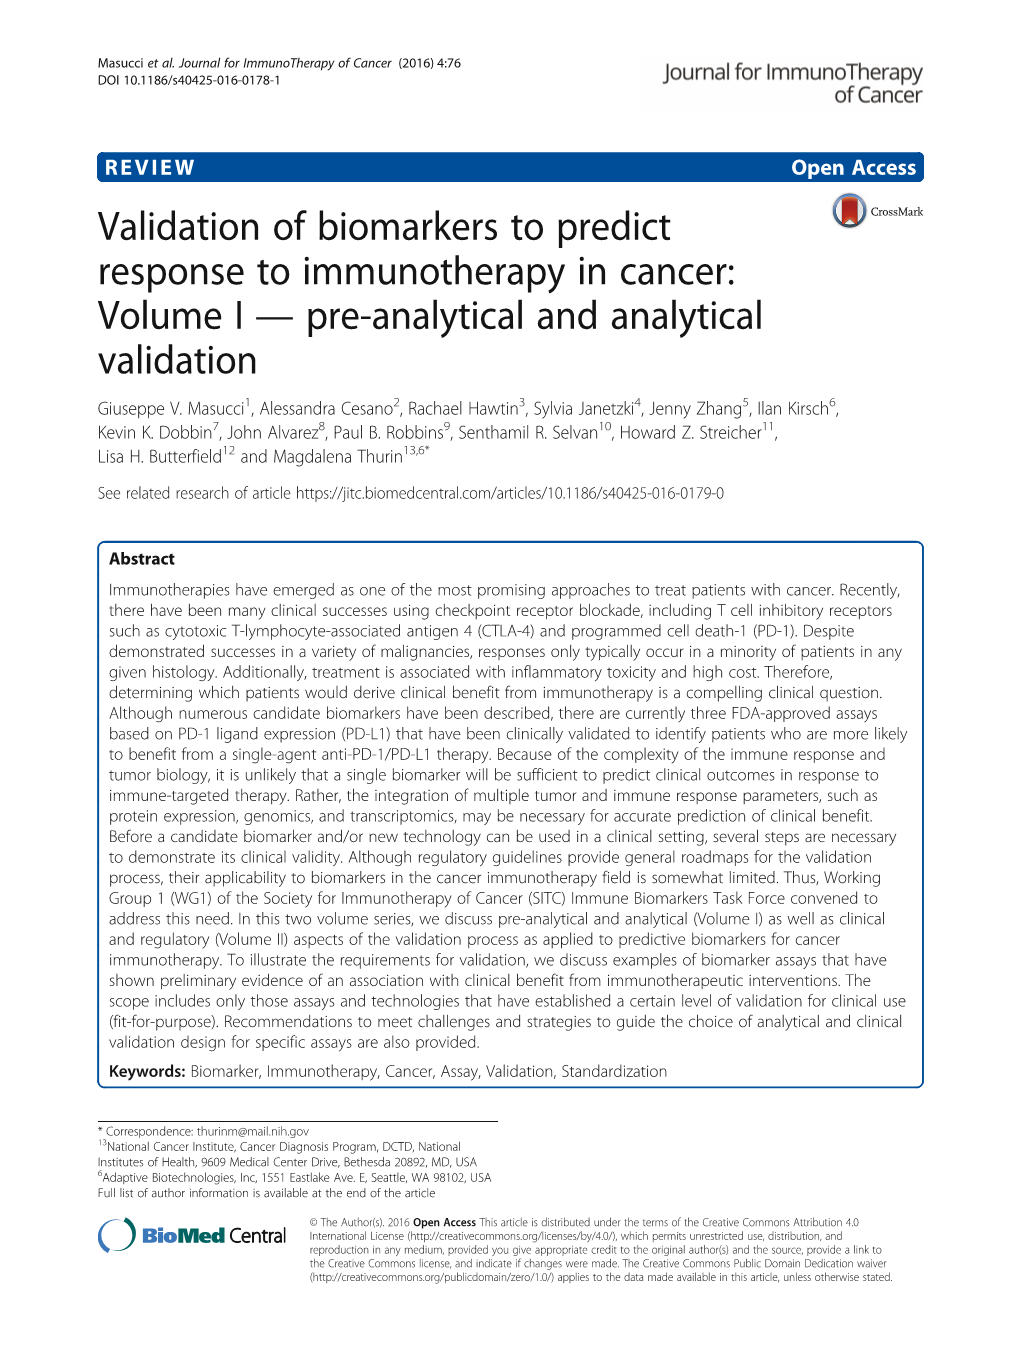 Validation of Biomarkers to Predict Response to Immunotherapy in Cancer: Volume I — Pre-Analytical and Analytical Validation Giuseppe V